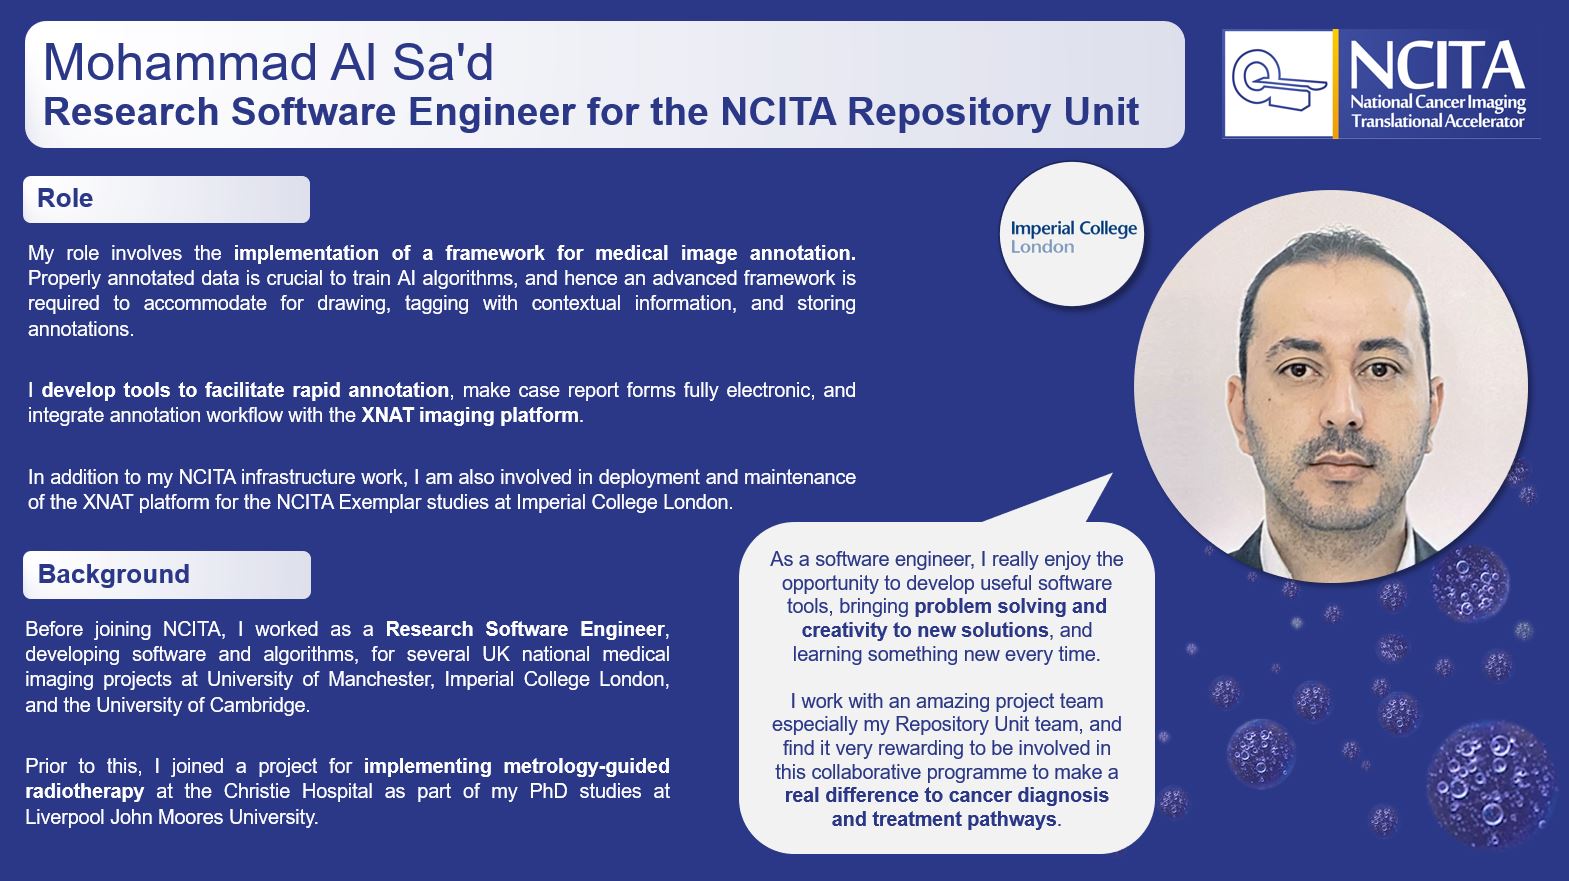 Mohammad Al Sa'd, Research Software Engineer for the NCITA Repository unit, provides an overview of his role as a Research Software Engineer for the NCITA Repository Unit